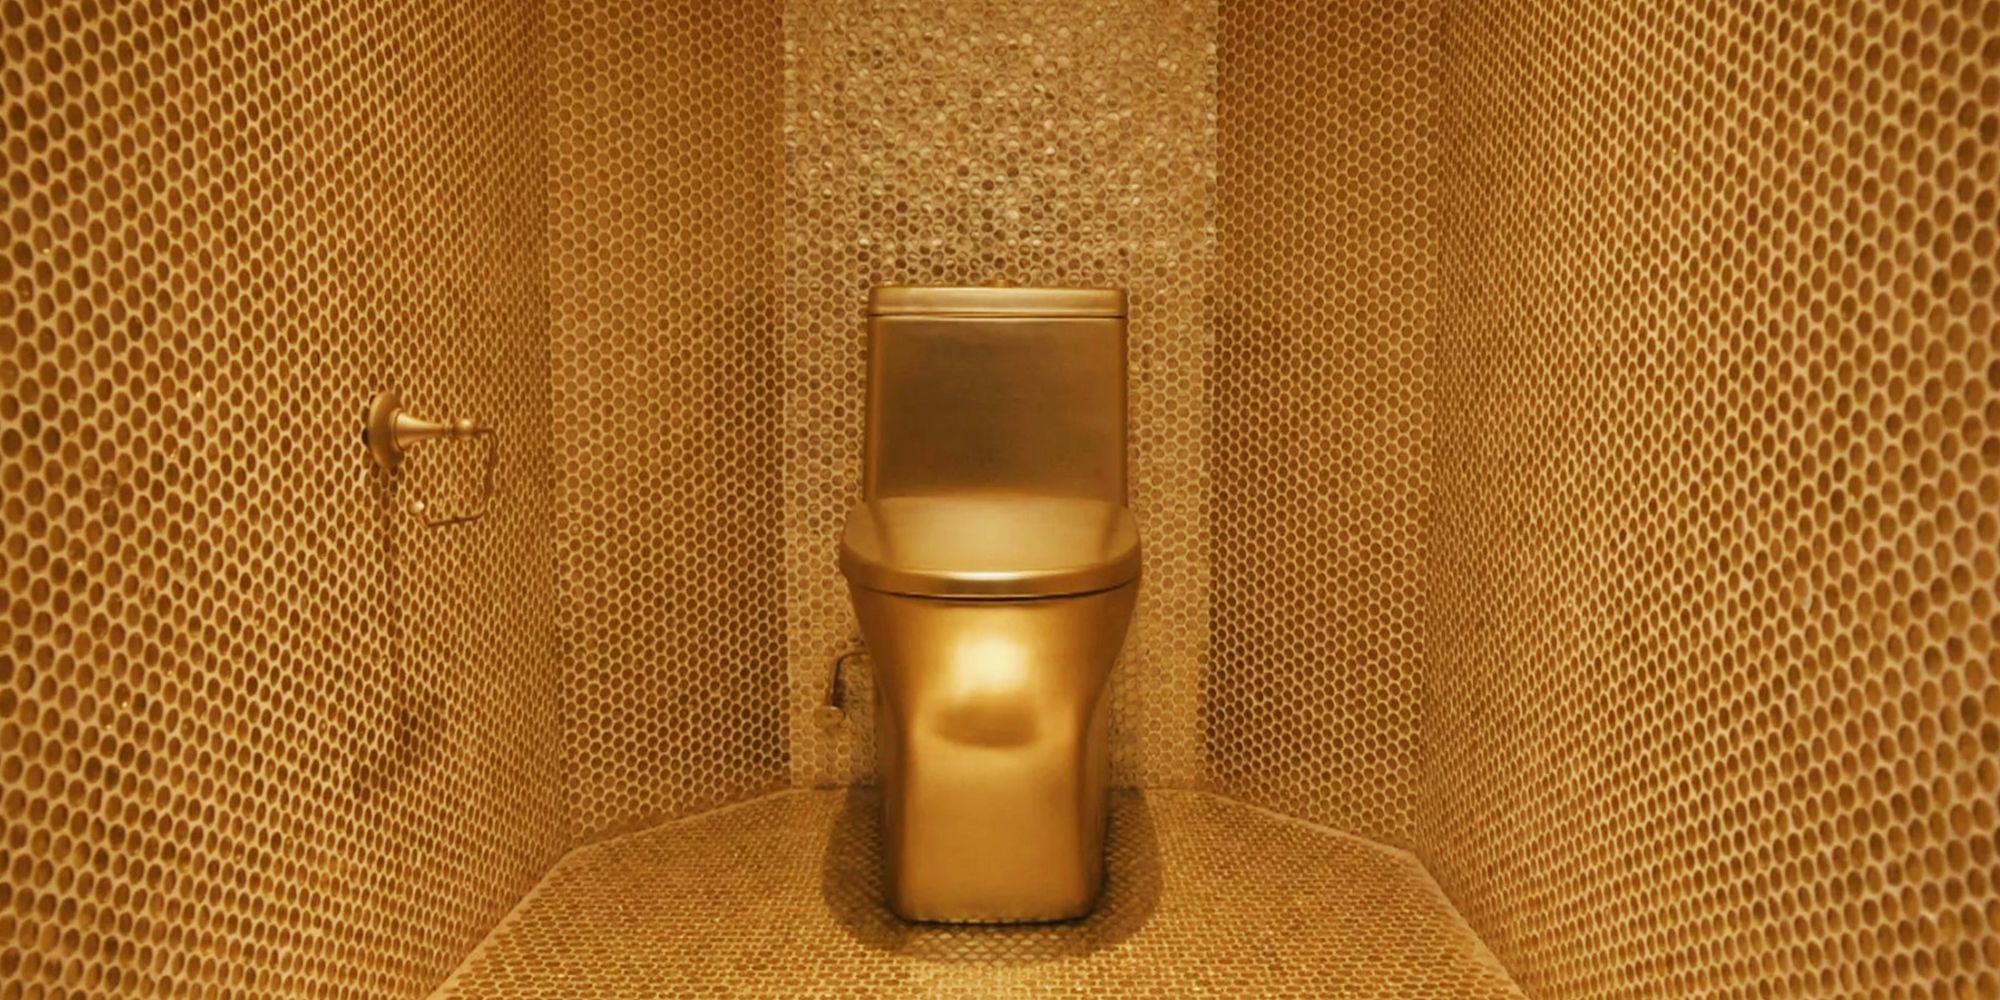 What does Saul's golden toilet mean